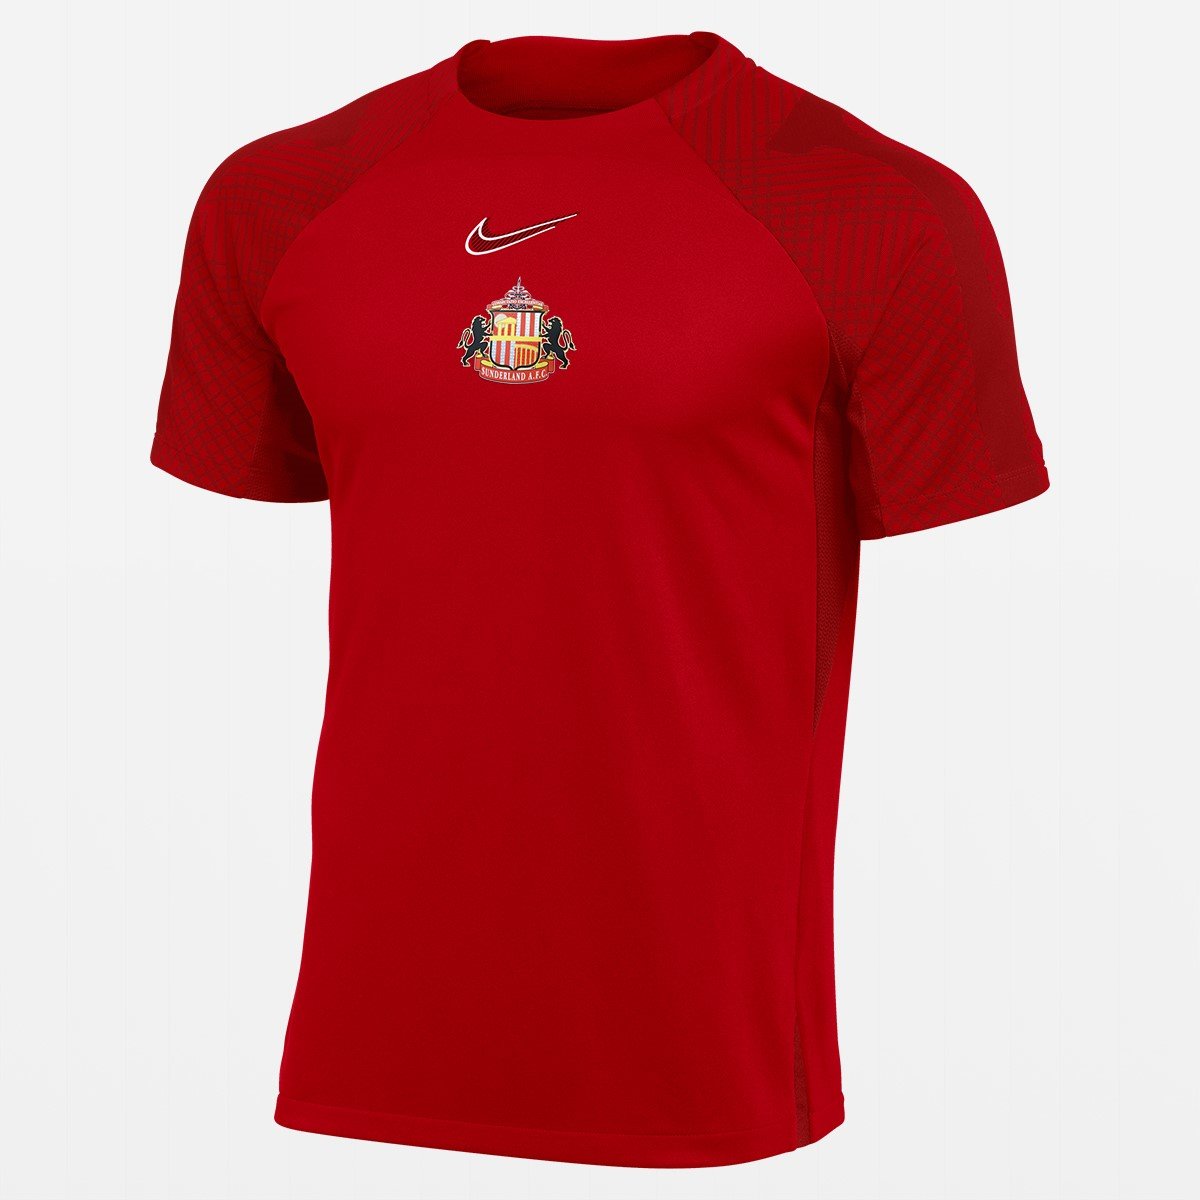 Buy the 22-23 SAFC Nike Training Tee online at Sunderland AFC Store